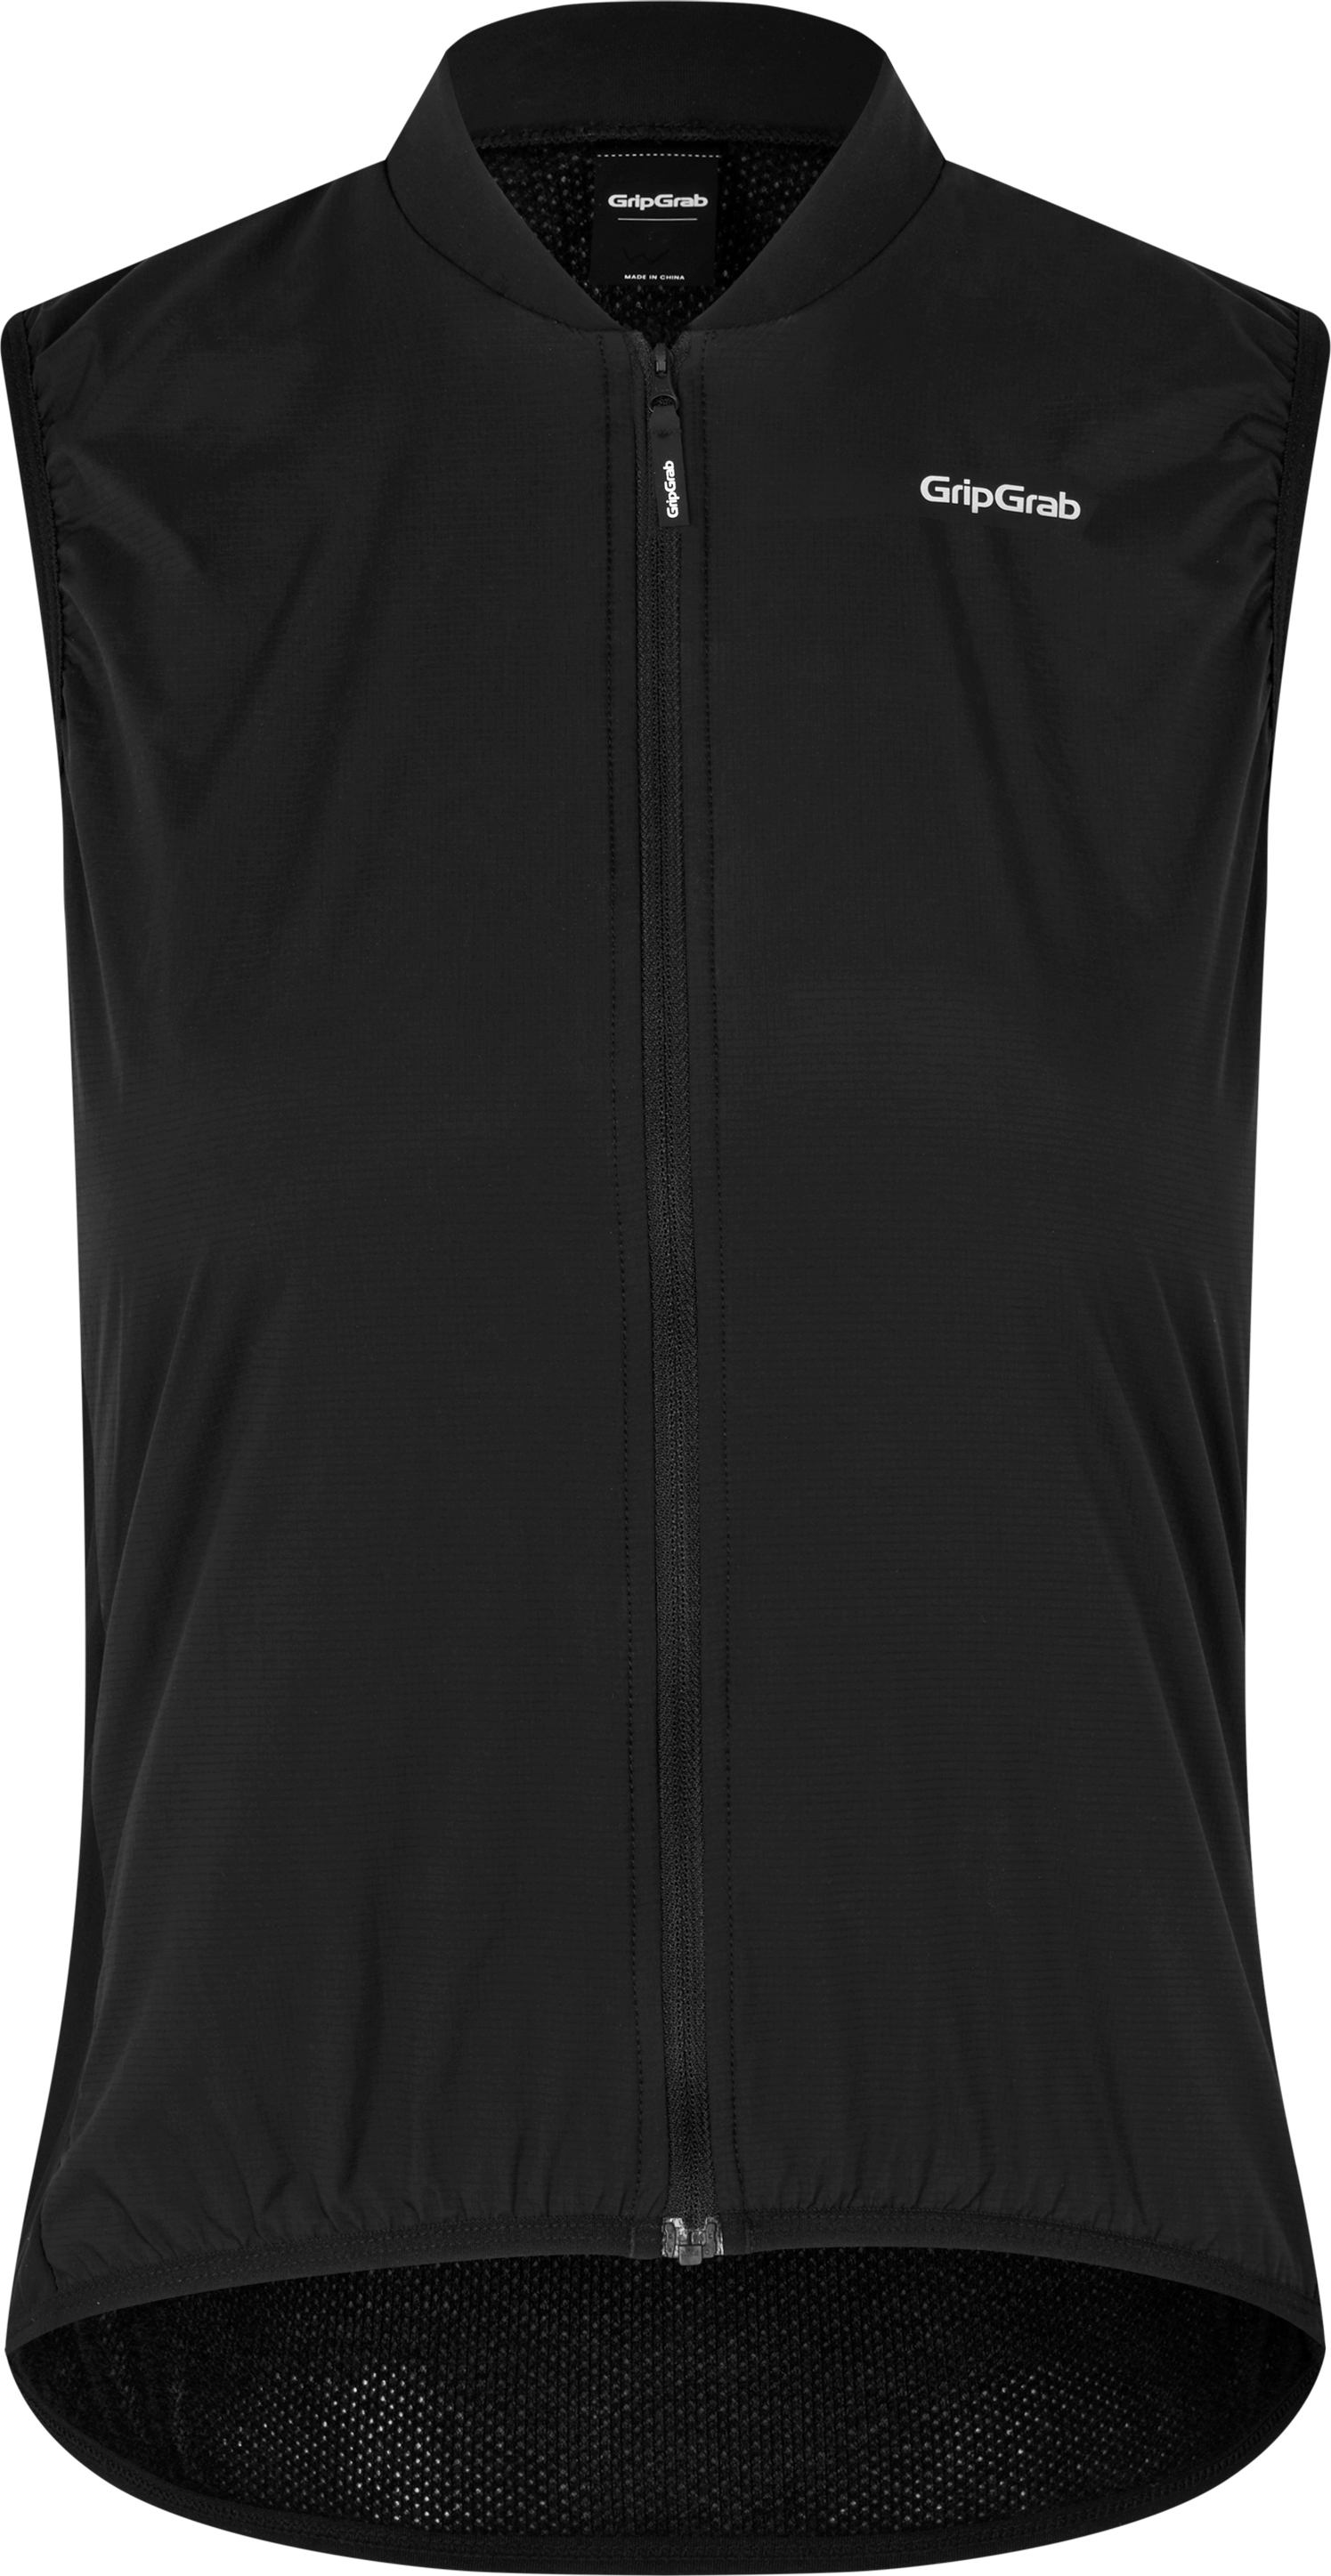 Gripgrab Women’s ThermaCore Bodywarmer Mid-Layer Vest Black